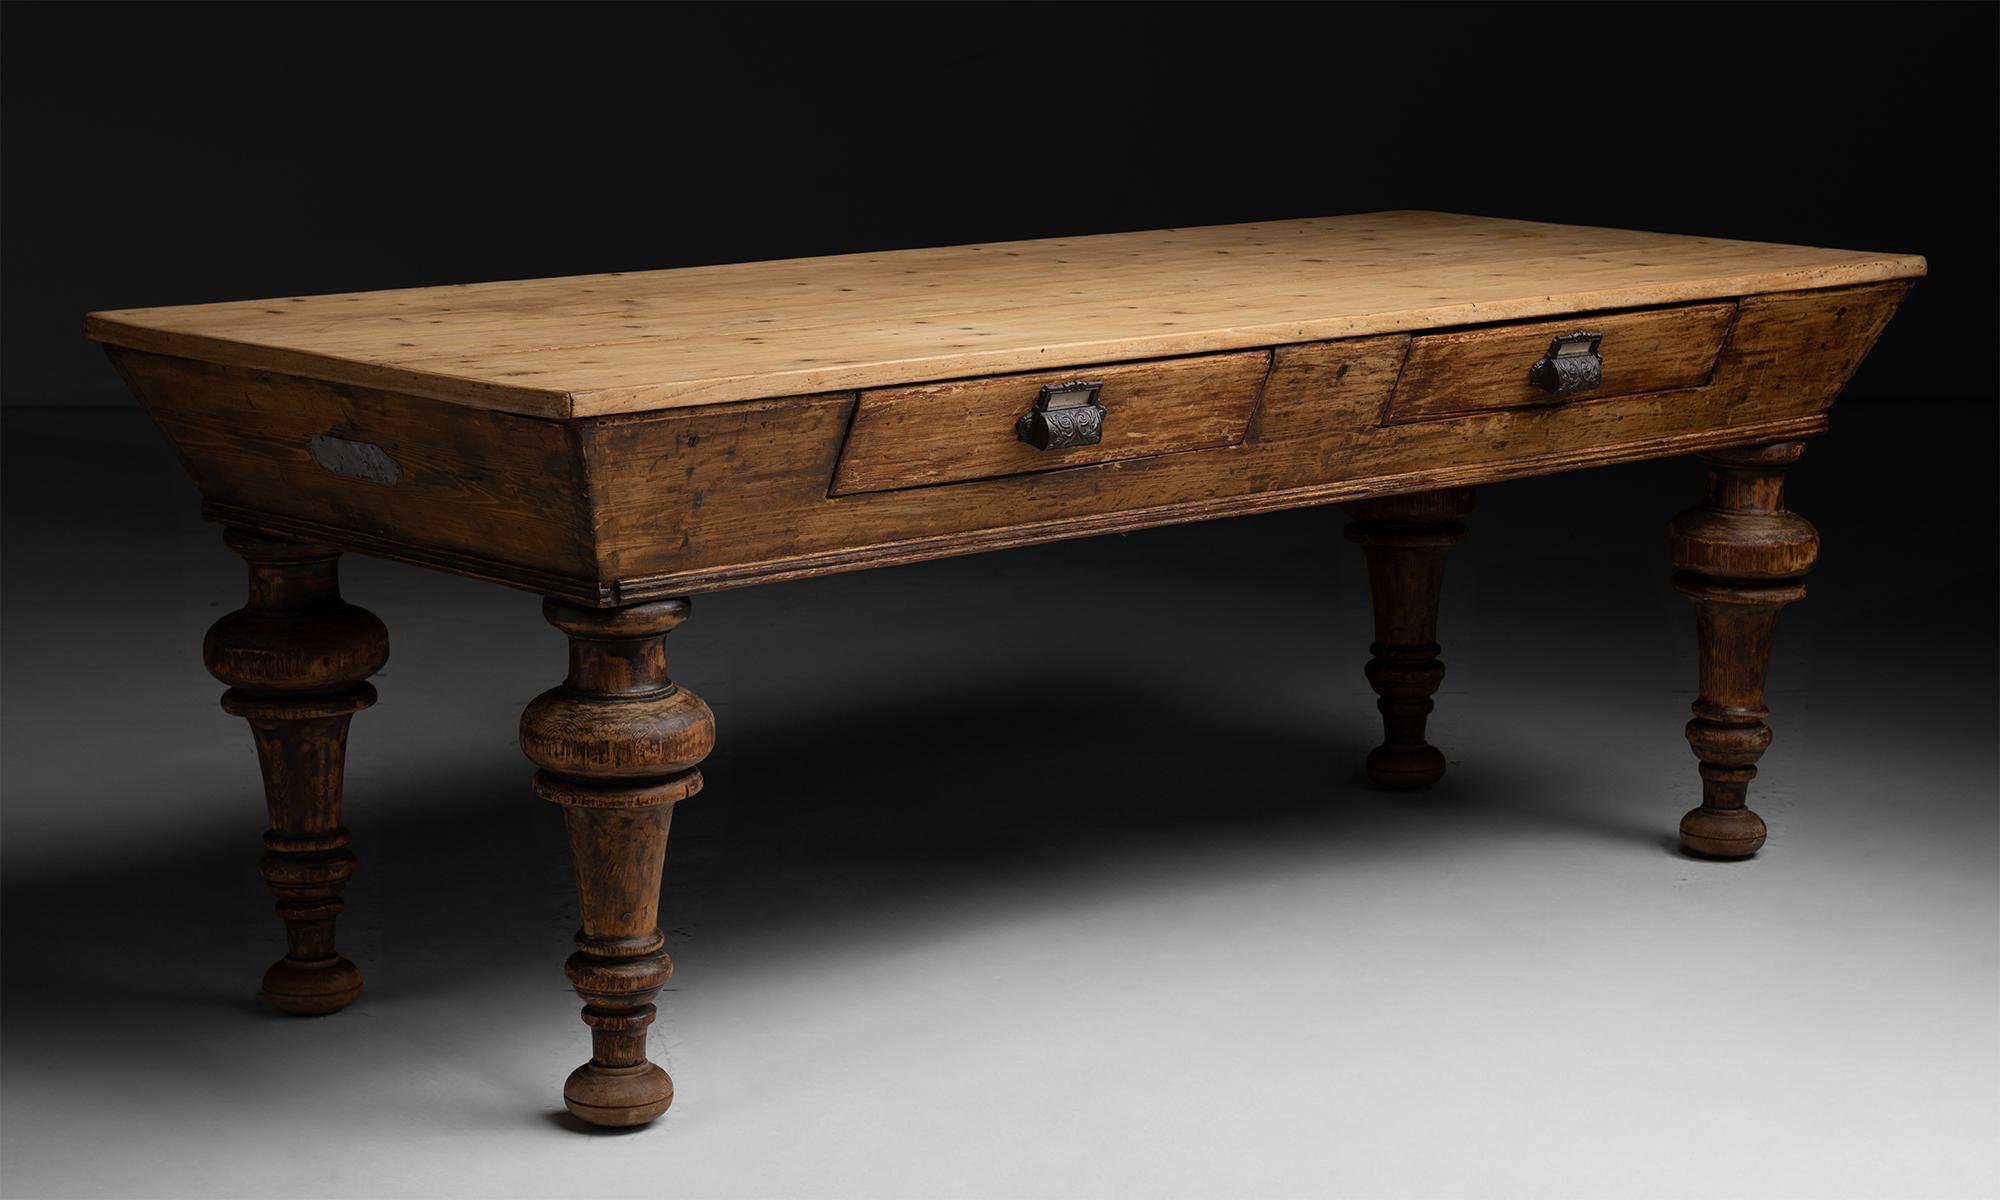 Draper’s Table

France circa 1860

Constructed in pine, angled surface with two drawers and intricate brass pulls.

88.75”L x 37.75”d x 32.75”h ( table )